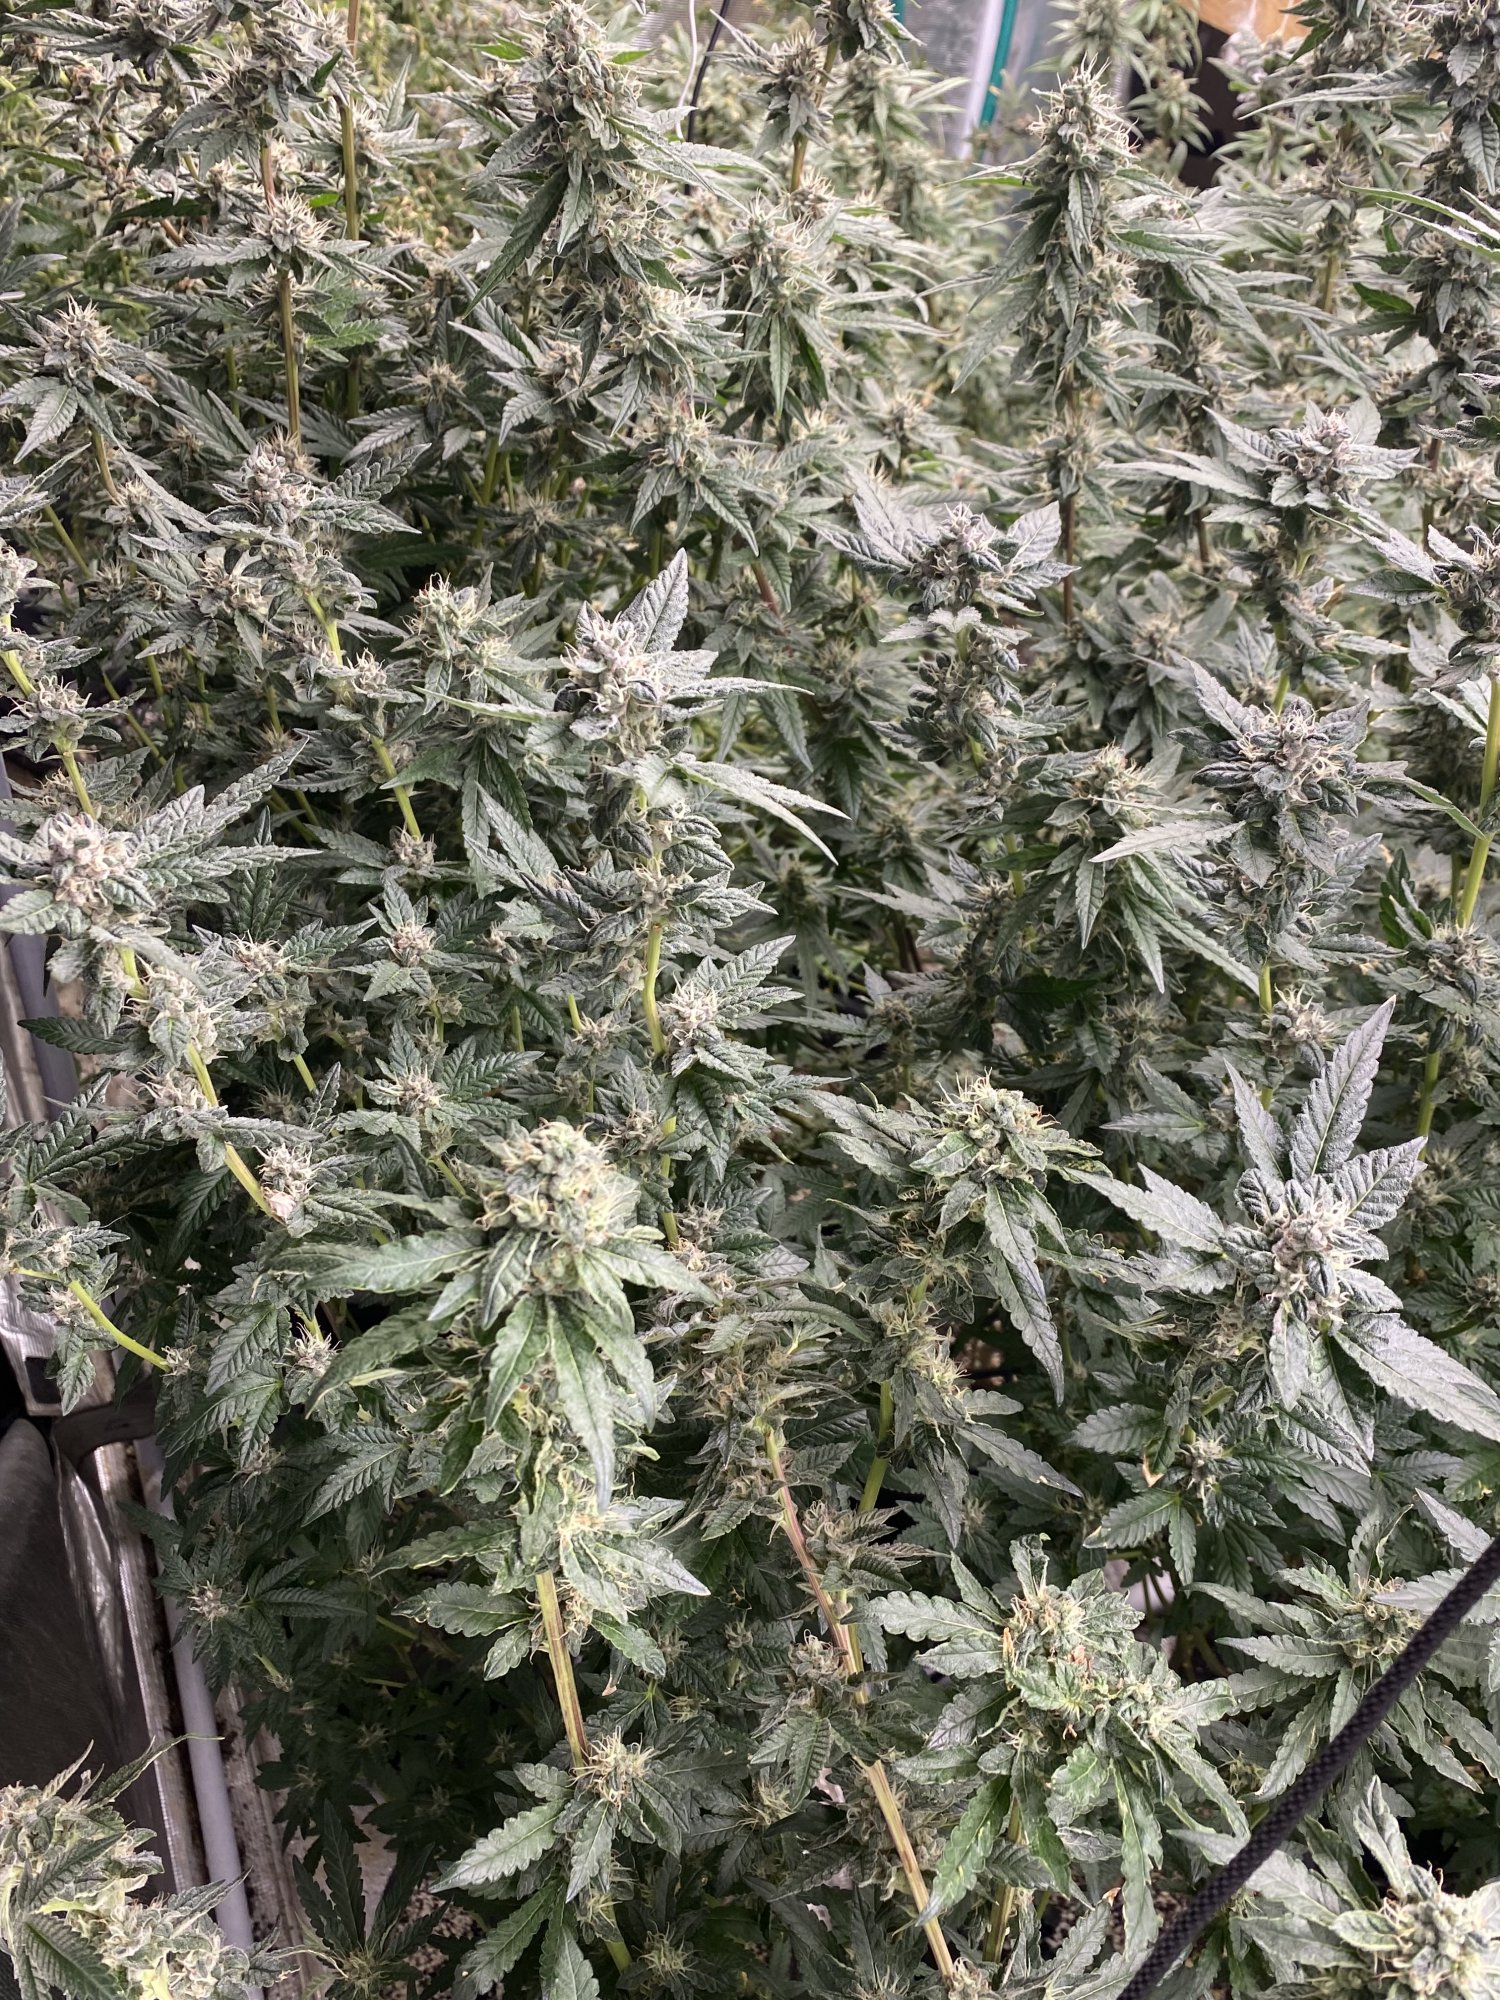 Third indoor grow tupur gold athena pro stack and cal mag power si and speedyveg 7